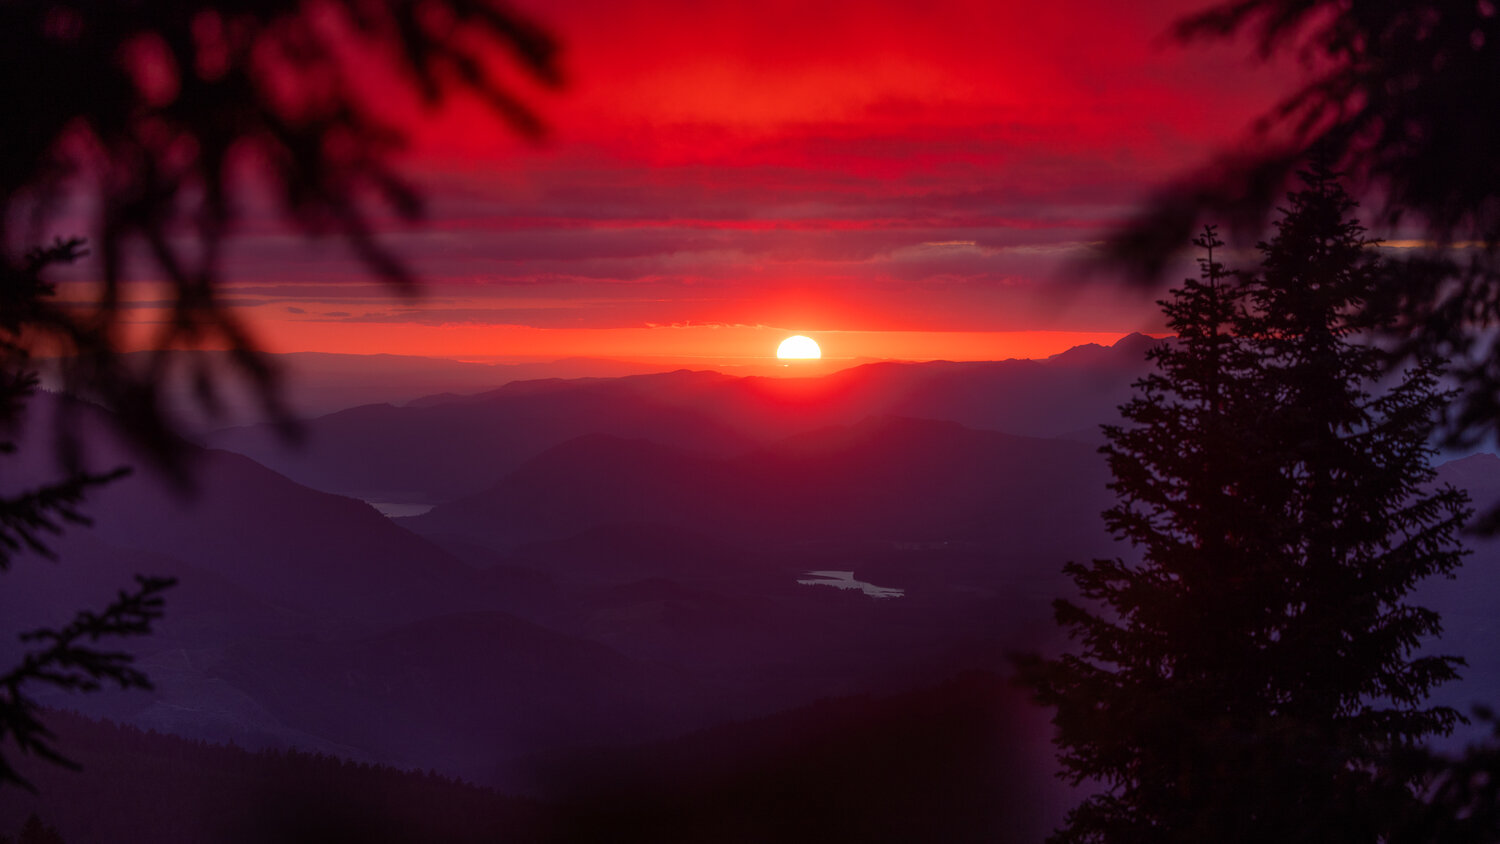 Clouds glow red as the sunset is seen from the Burley Mountain Trail on Thursday, Aug. 10, in the Gifford Pinchot National Forest.